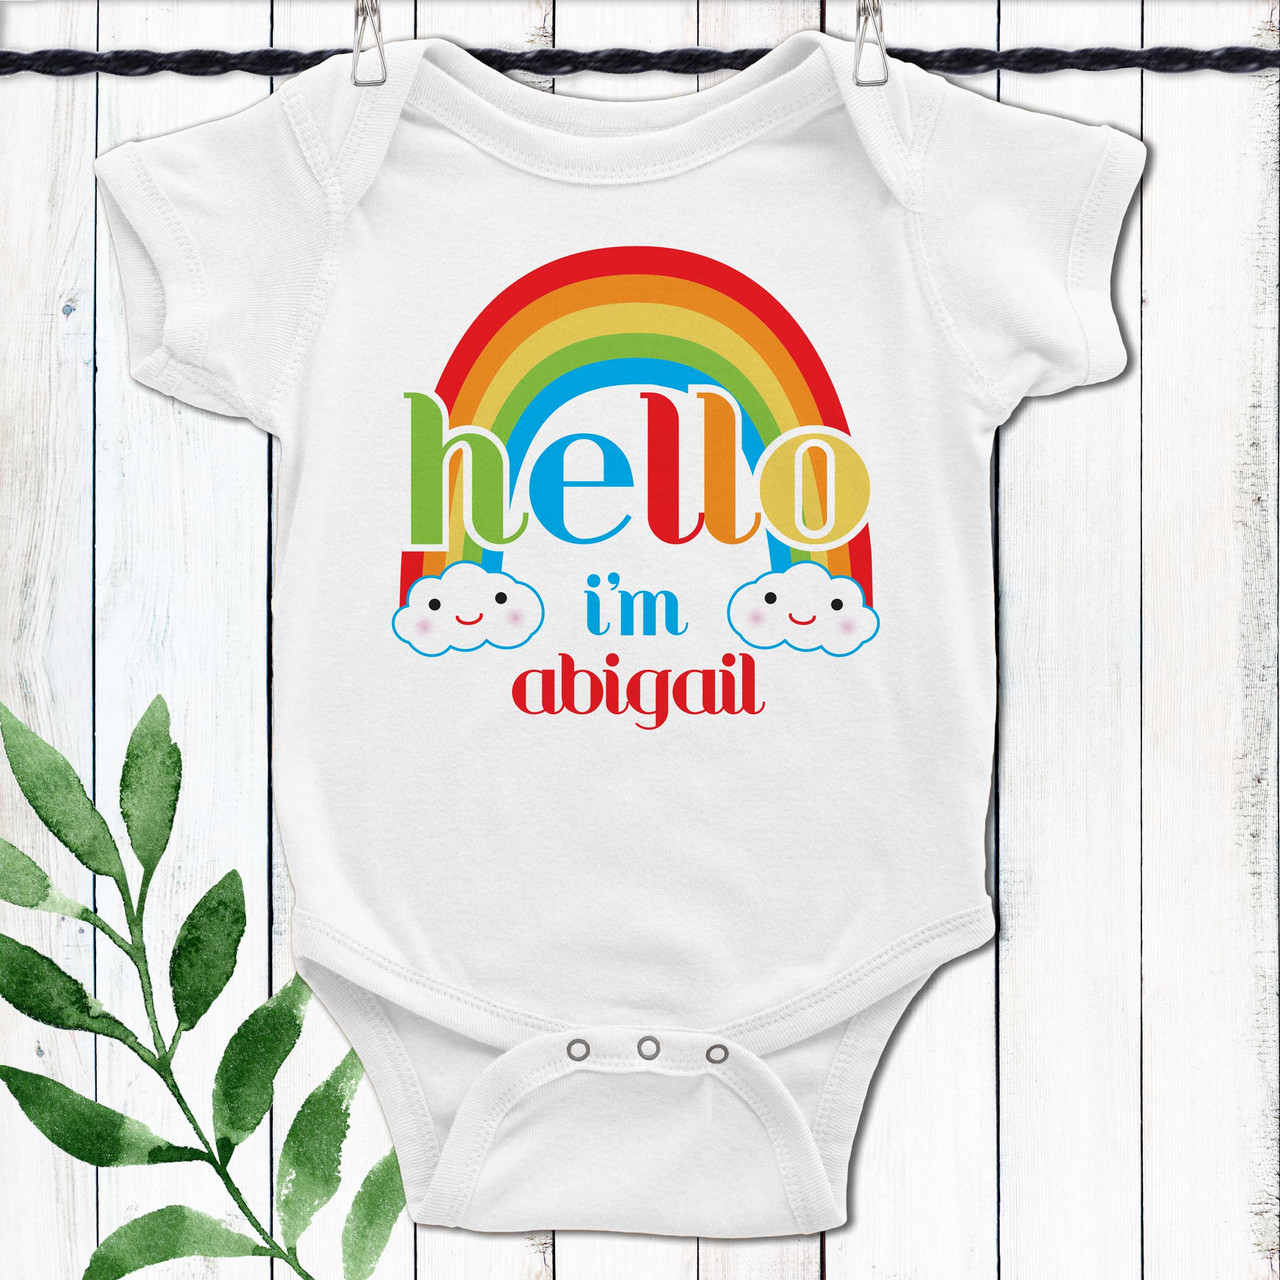 https://cdn11.bigcommerce.com/s-5grzuu6/images/stencil/1280x1280/products/4977/52827/Hello-Sunshine-Rainbow_Personalized-Baby-Bodysuit_with_Name__79690.1675192999.jpg?c=2